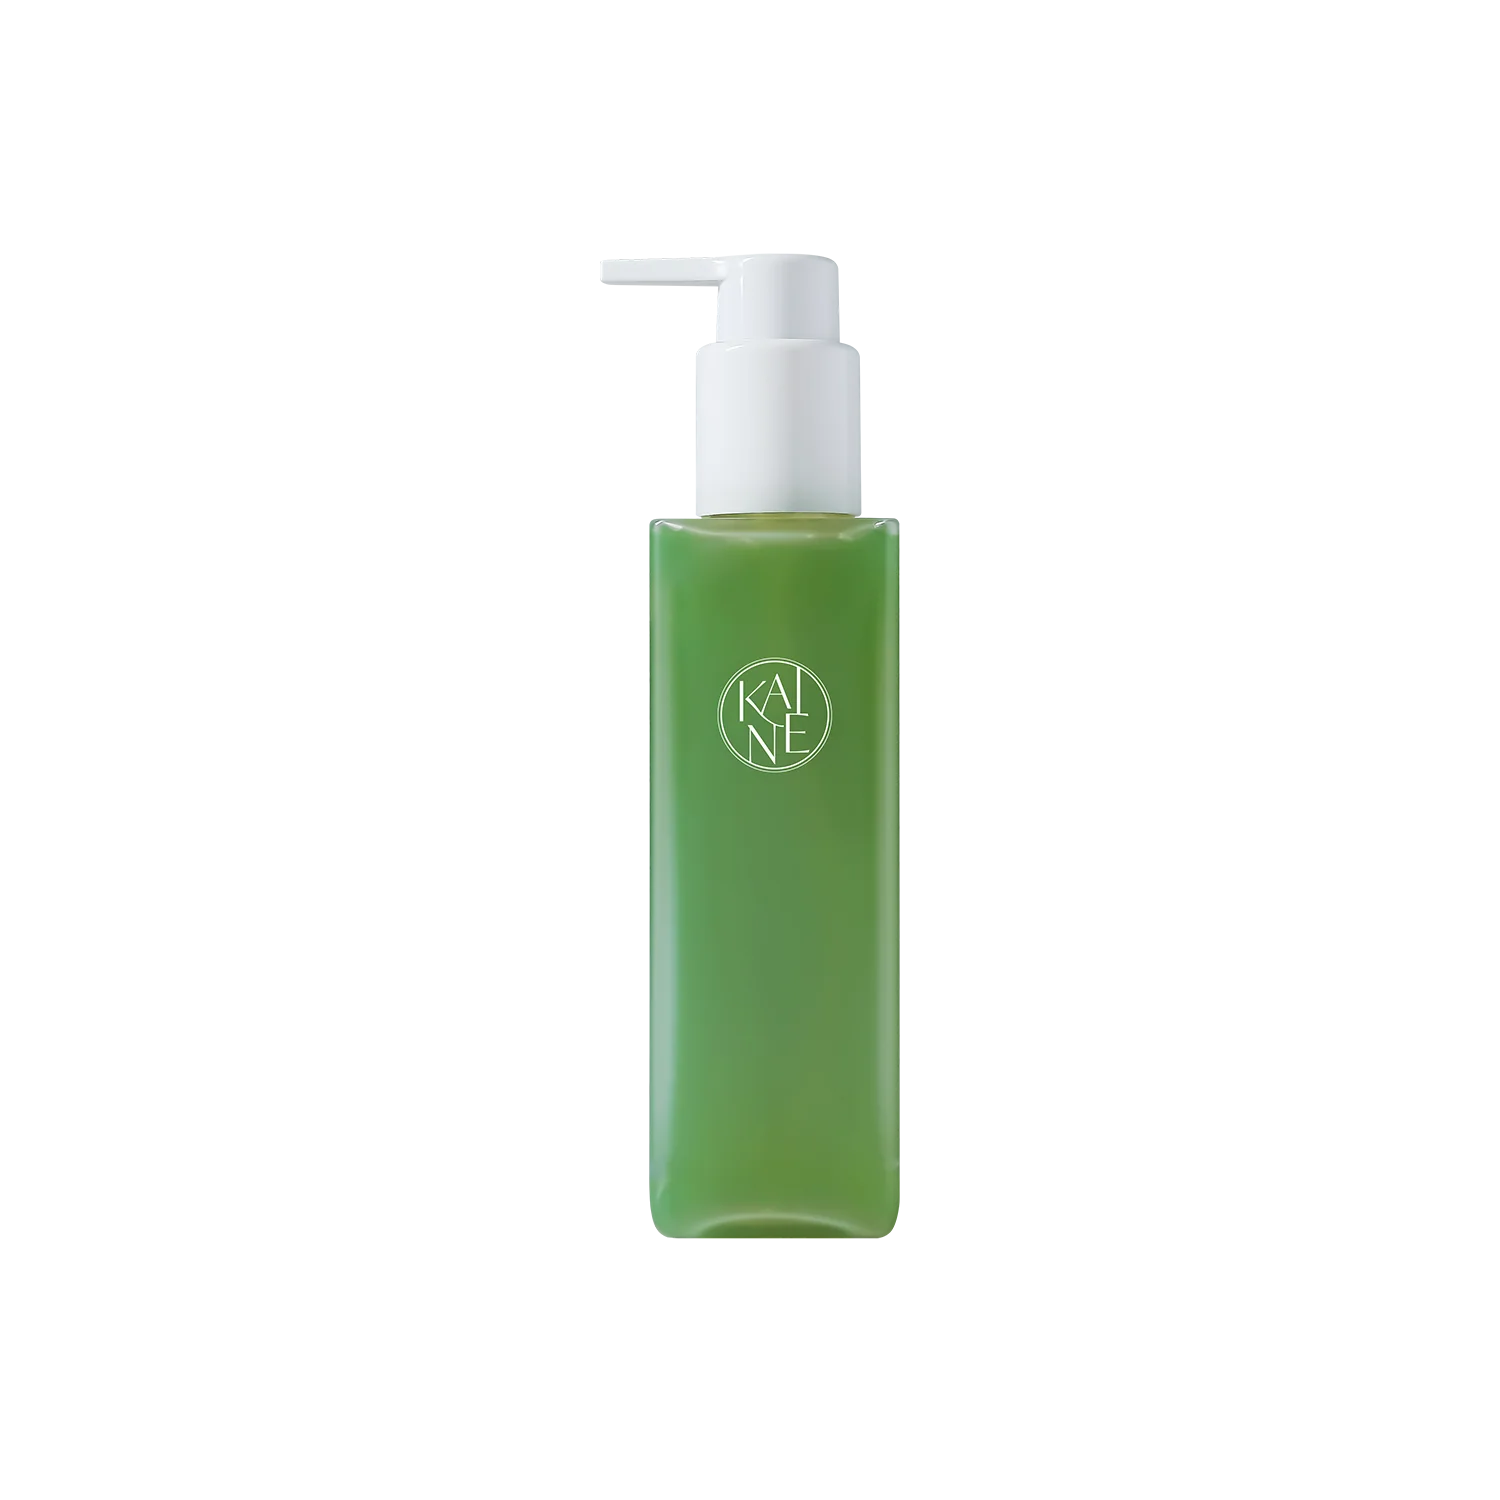 KAINE - Rosemary Relief Gel Cleanser